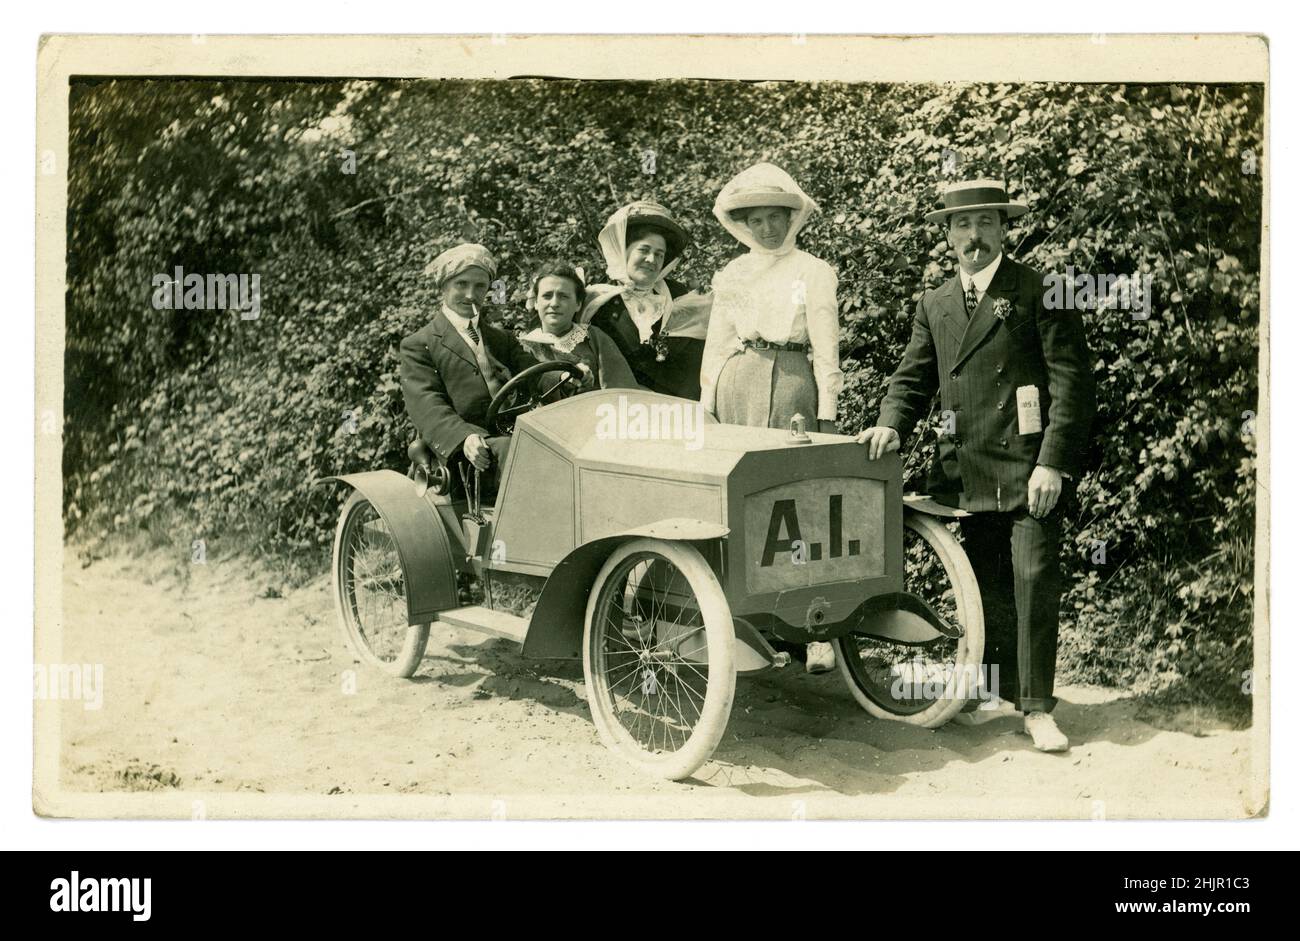 Original amusing Edwardian era postcard of happy tourists, men and women wearing straw boaters and hats, dressed in smart Sunday Best clothes, posting for a photo in a model car, photographic (some characters) prop, on a summer seaside holiday, photographed by  H. Batty, The Jetty Studio, Clacton-on-Sea, Essex, U.K. circa 1910, 1912. Stock Photo